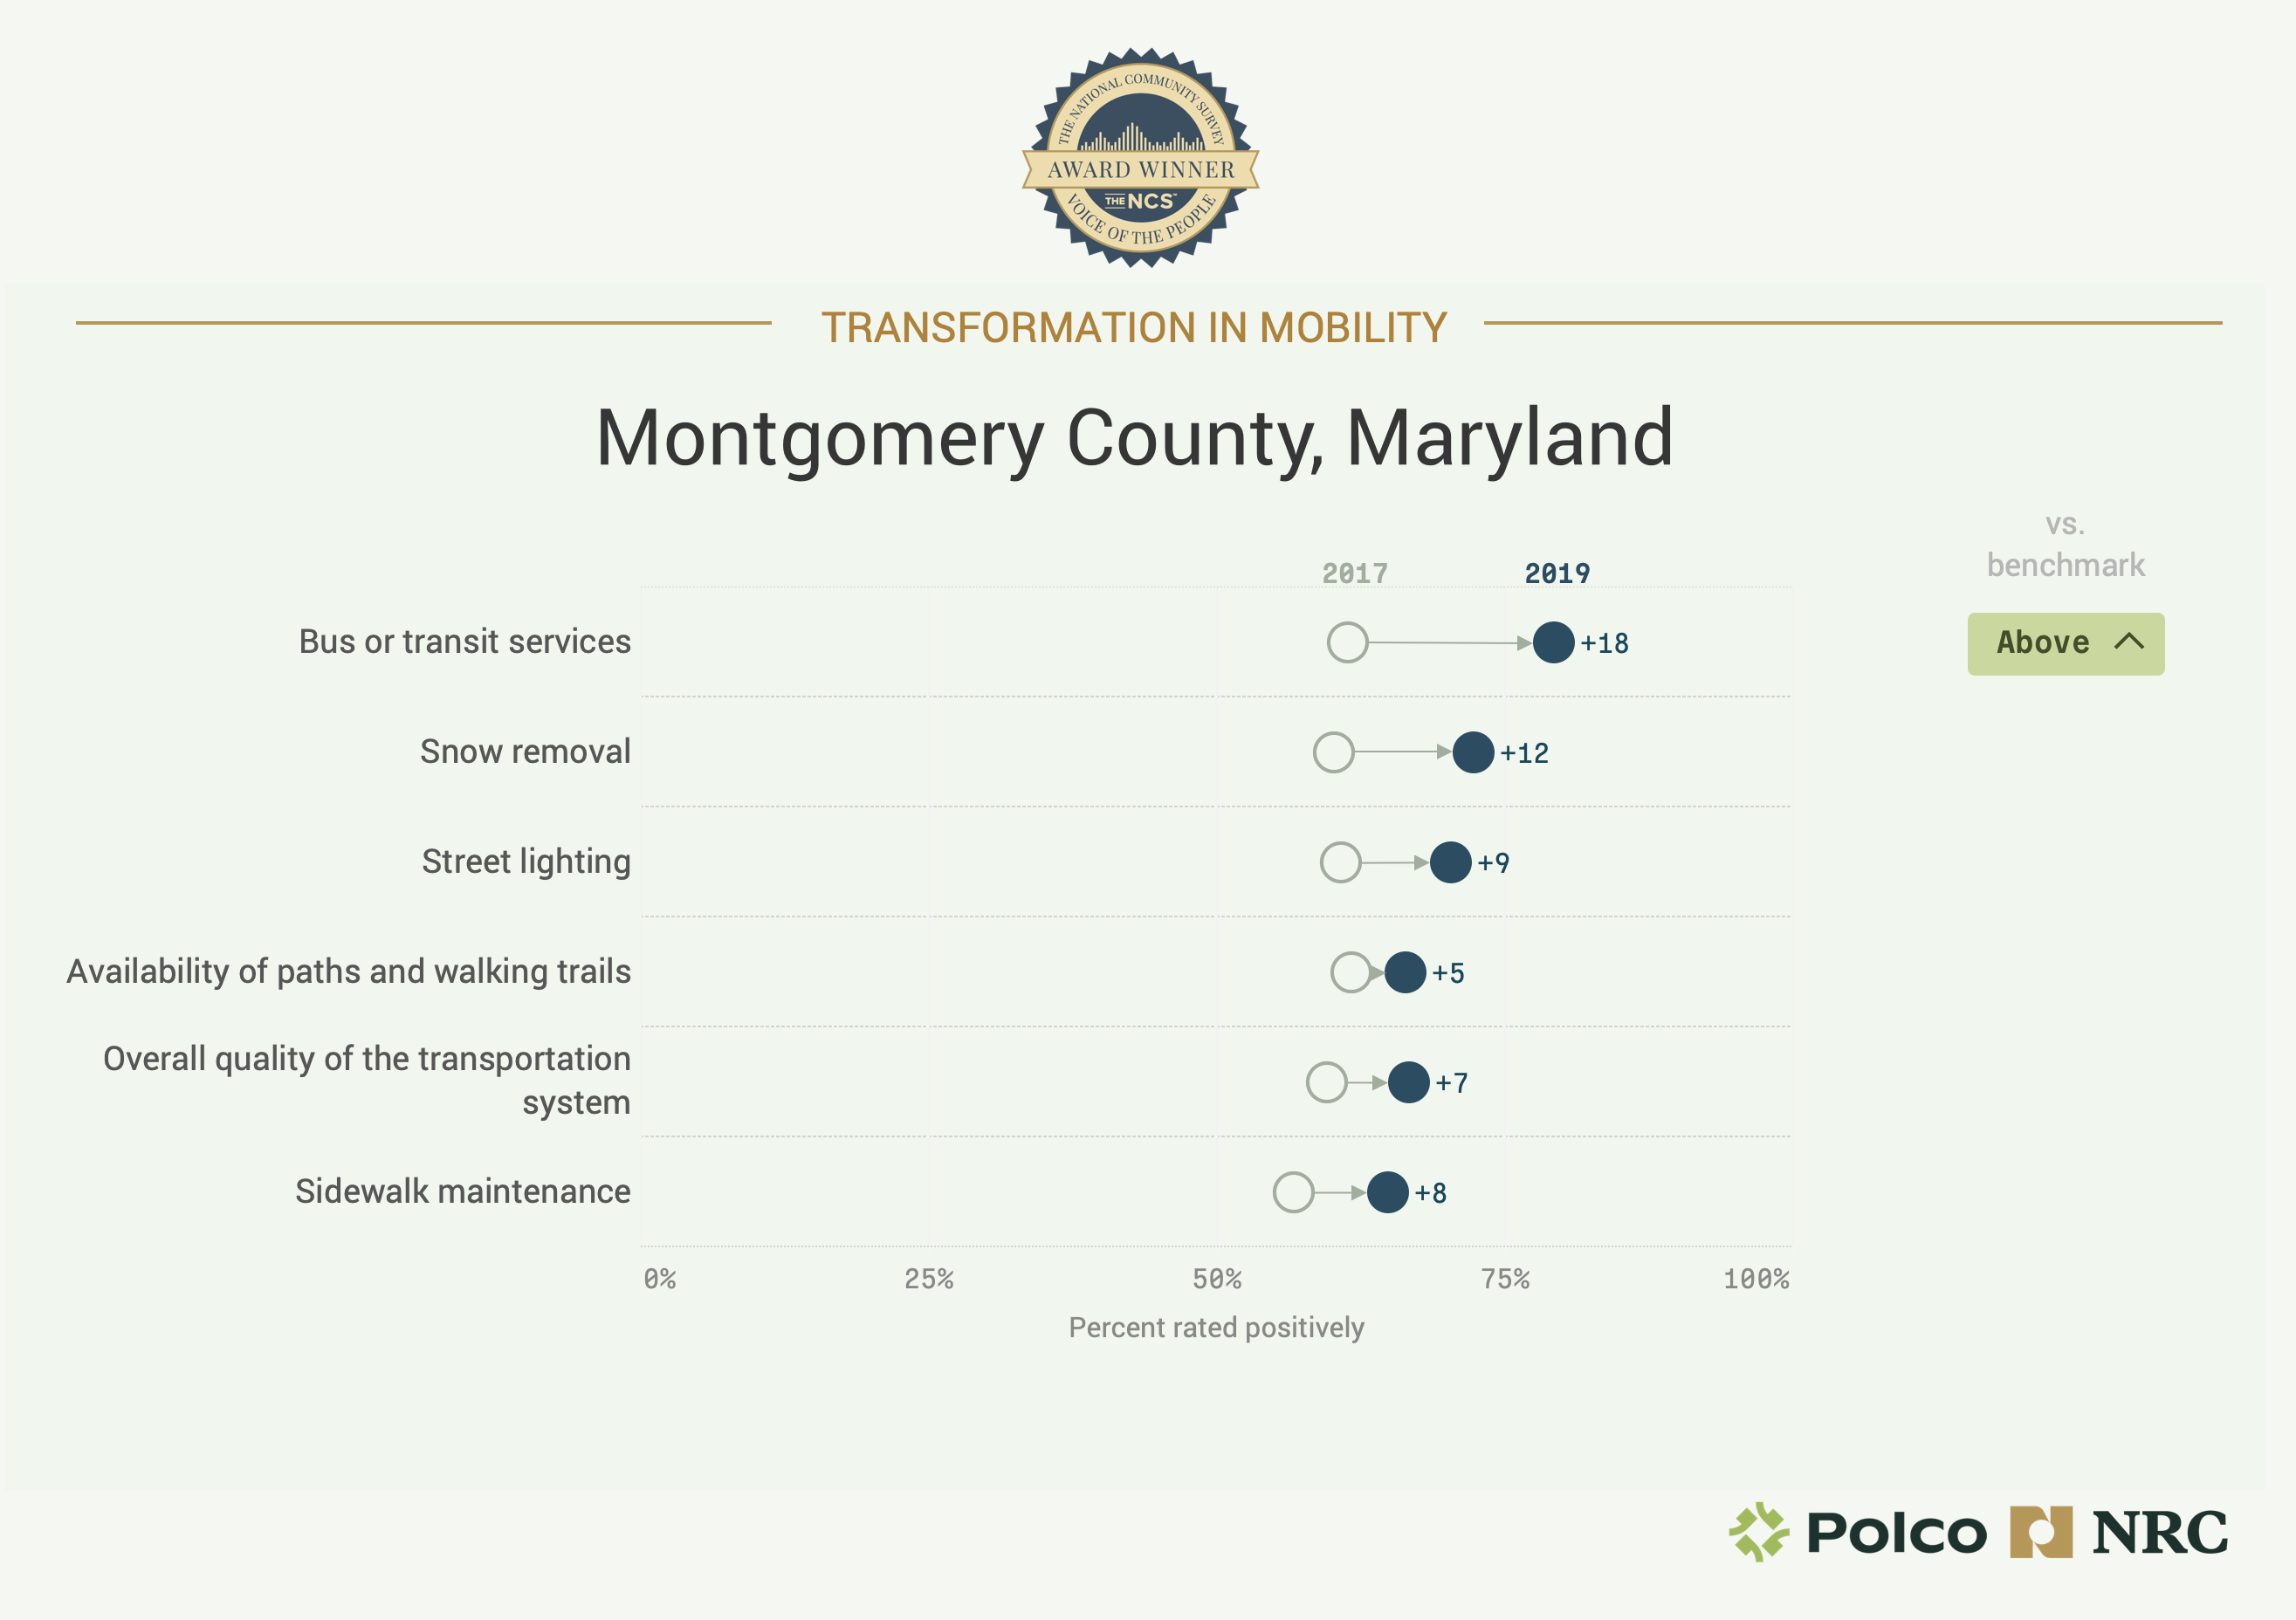 Chart showing Montgomery County's Transformation in Mobility